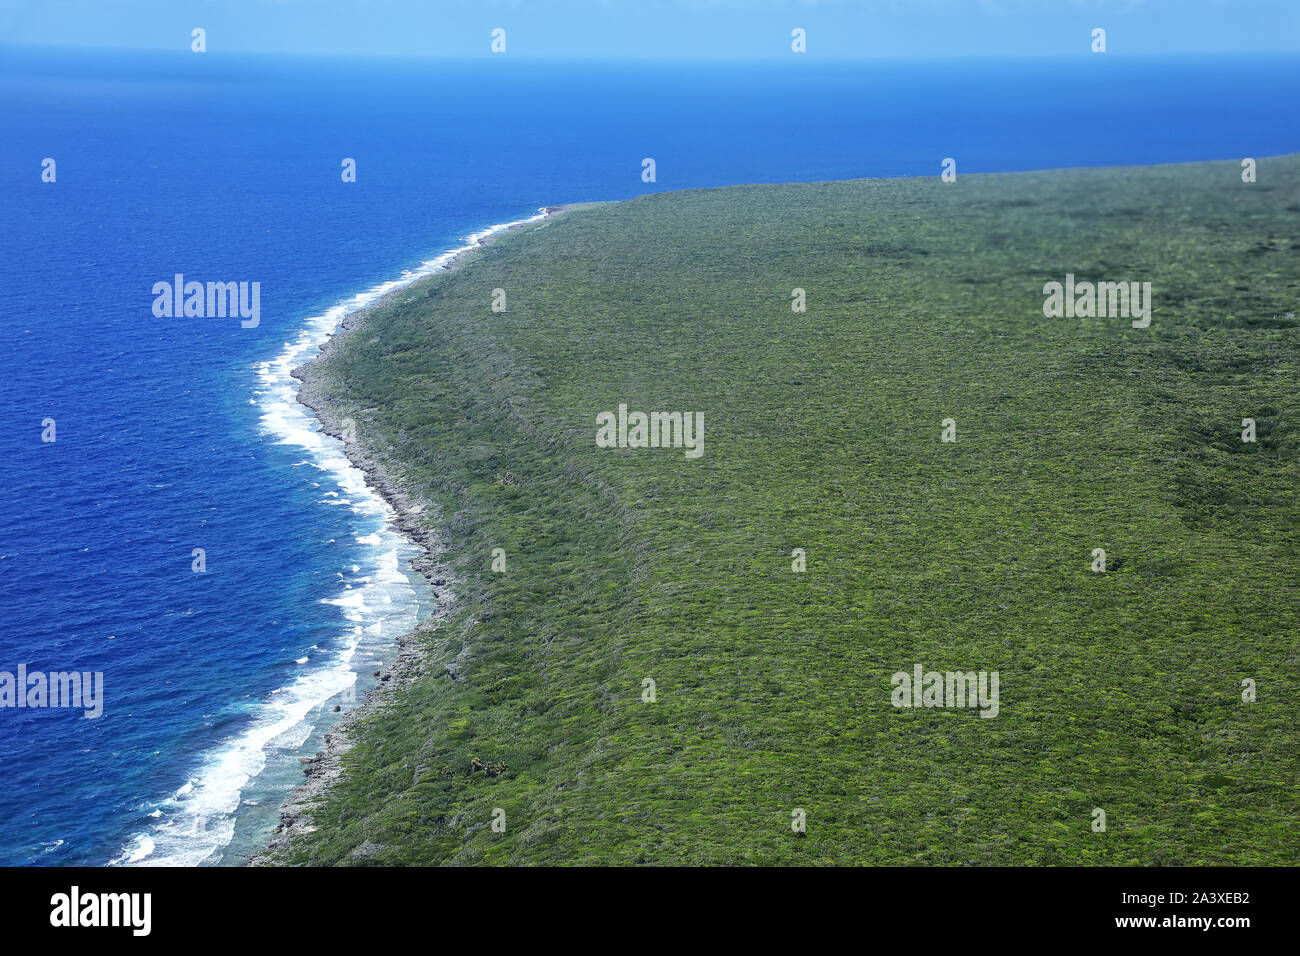 Aerial view of Ouvea Island, New Caledonia. Ouvea is a commune in the Loyalty Islands Province. Stock Photo